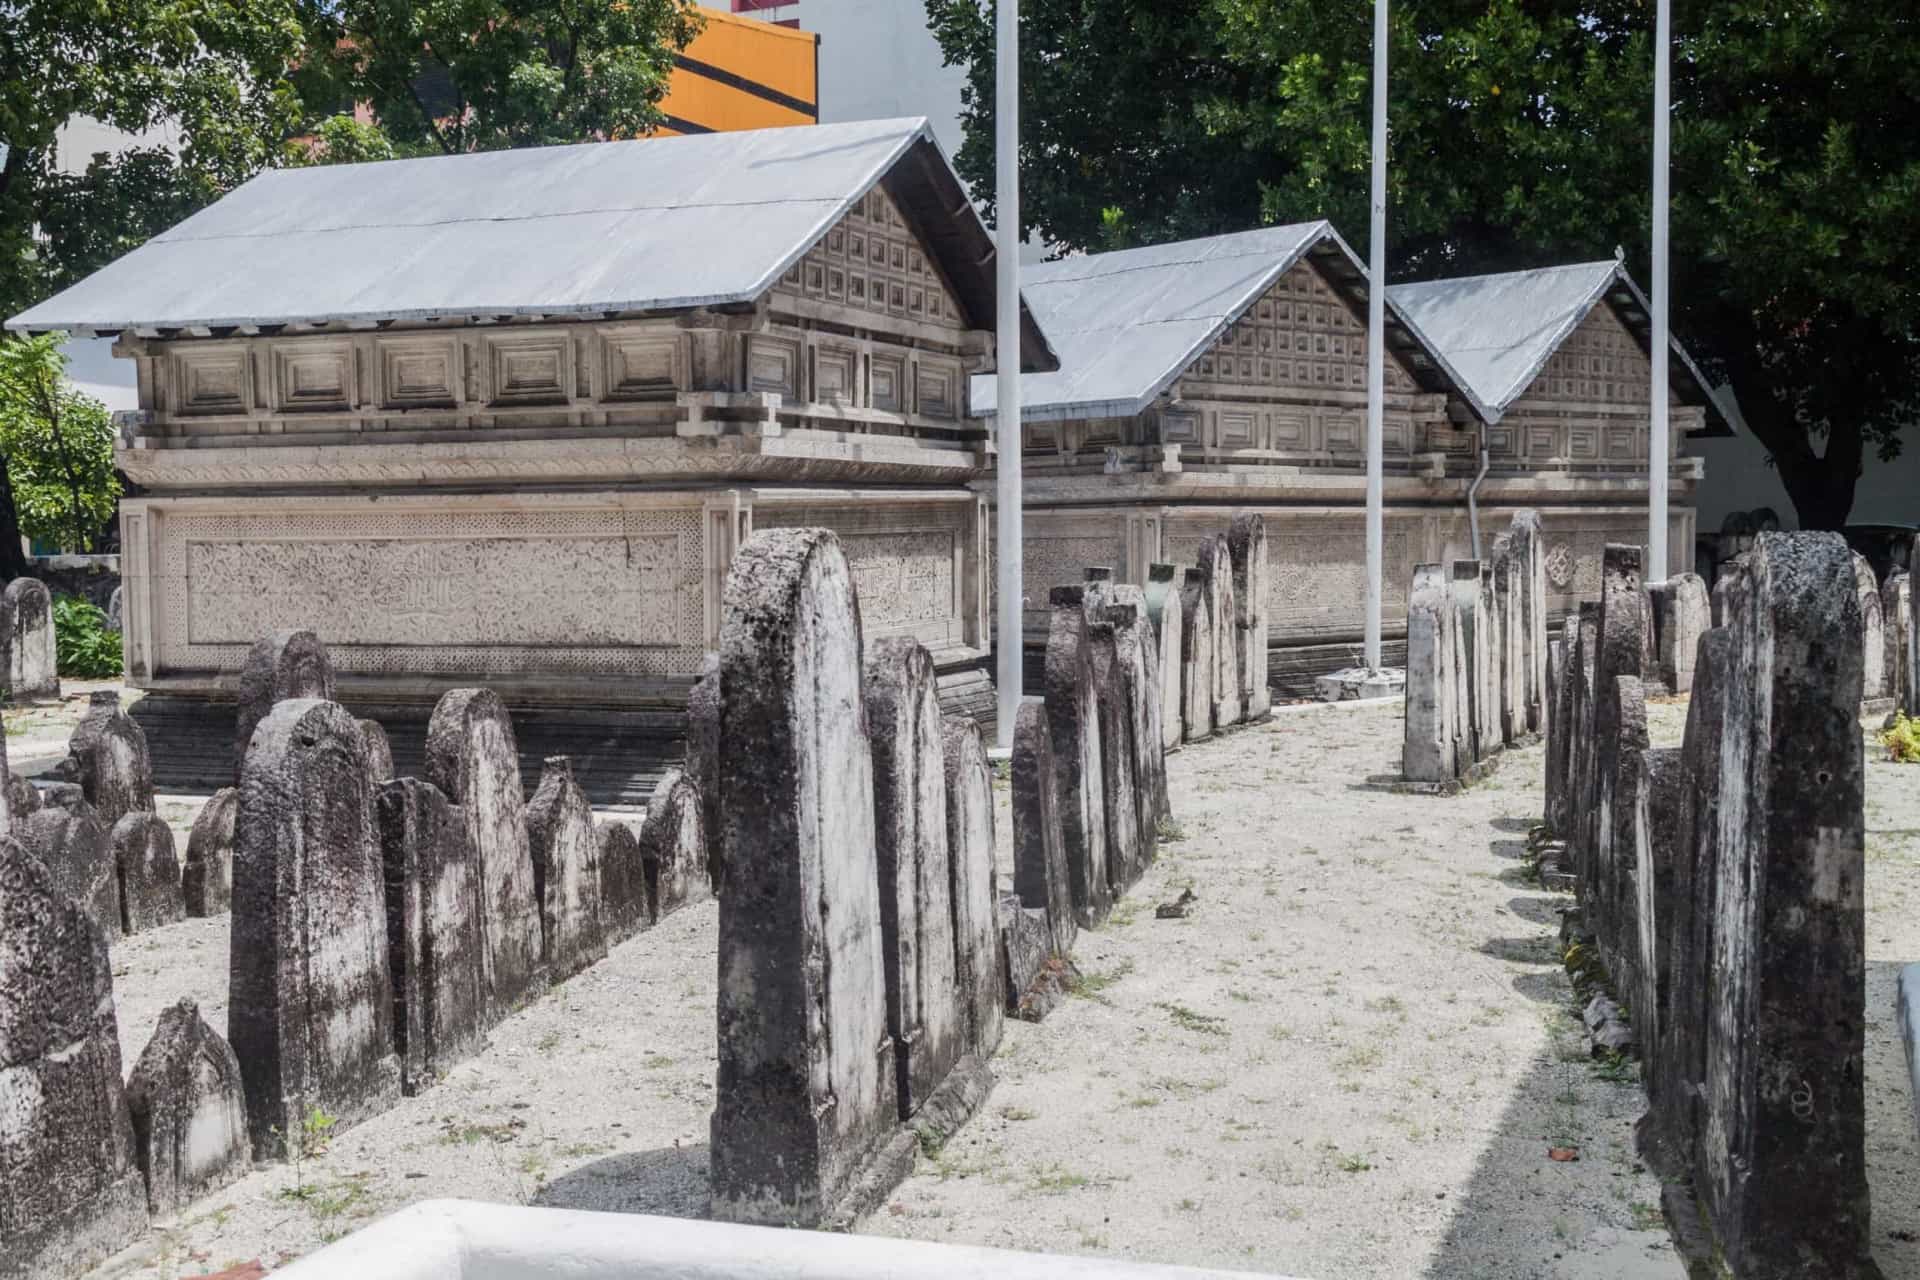 <p>While you're in Malé, take a look here. There are very few buildings that have survived time because of the constant flooding and unstable land. However, this <a href="https://www.starsinsider.com/travel/386186/world-heritage-sites-that-could-disappear-anytime" rel="noopener">UNESCO</a> site, known as the "Old Friday Mosque," is one of the oldest and most ornate.</p>